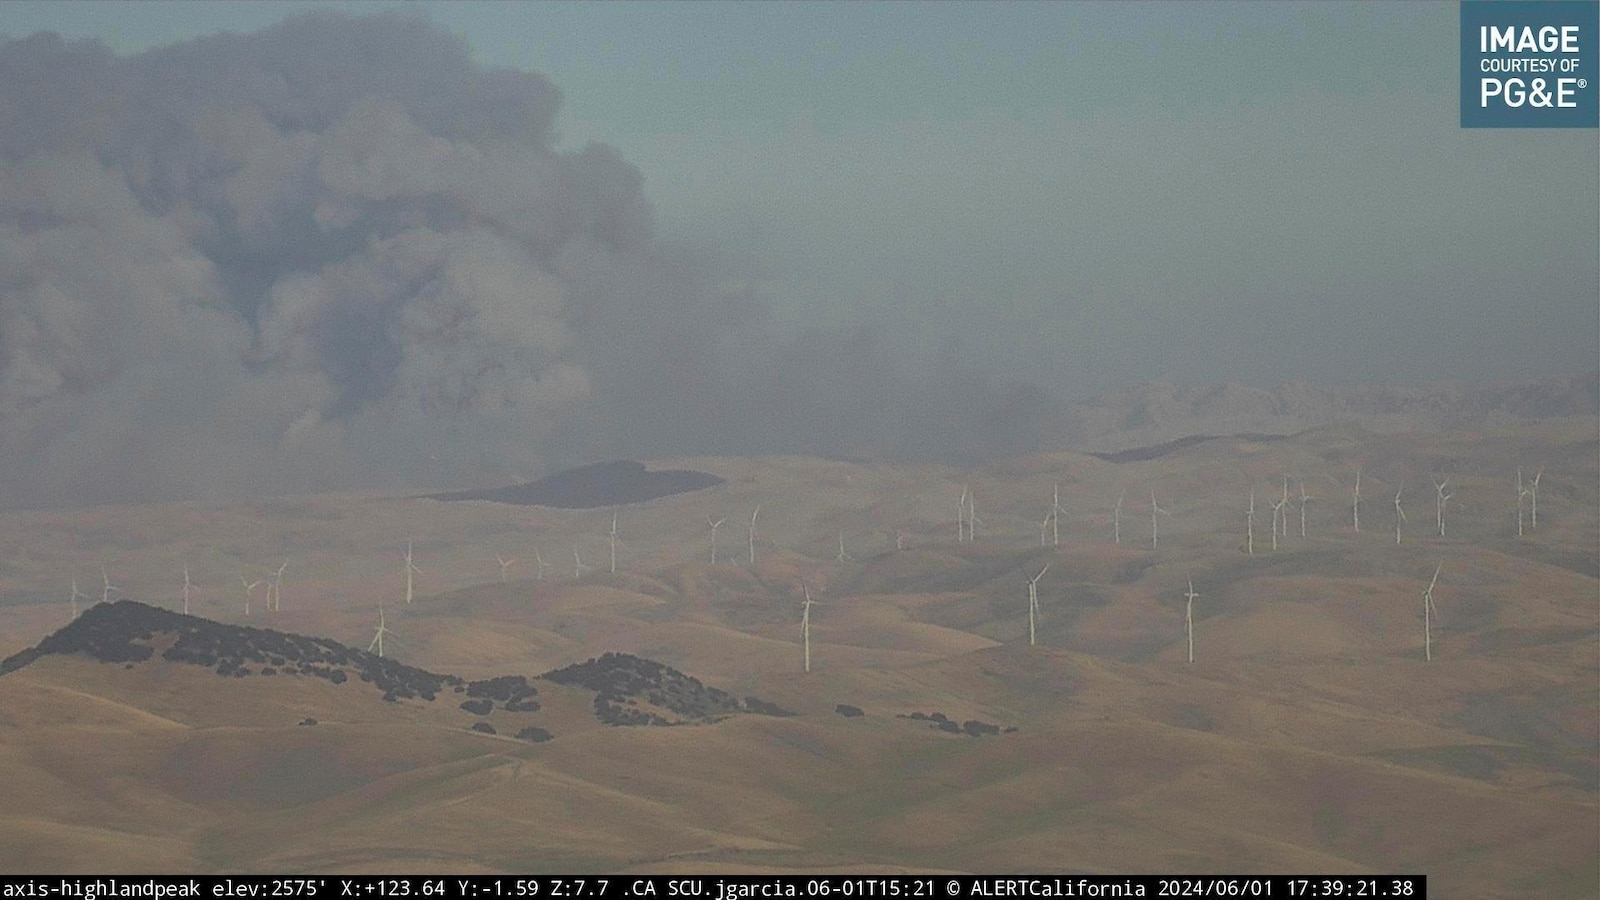 Wildfire east of San Francisco being battled by California firefighters in windy conditions